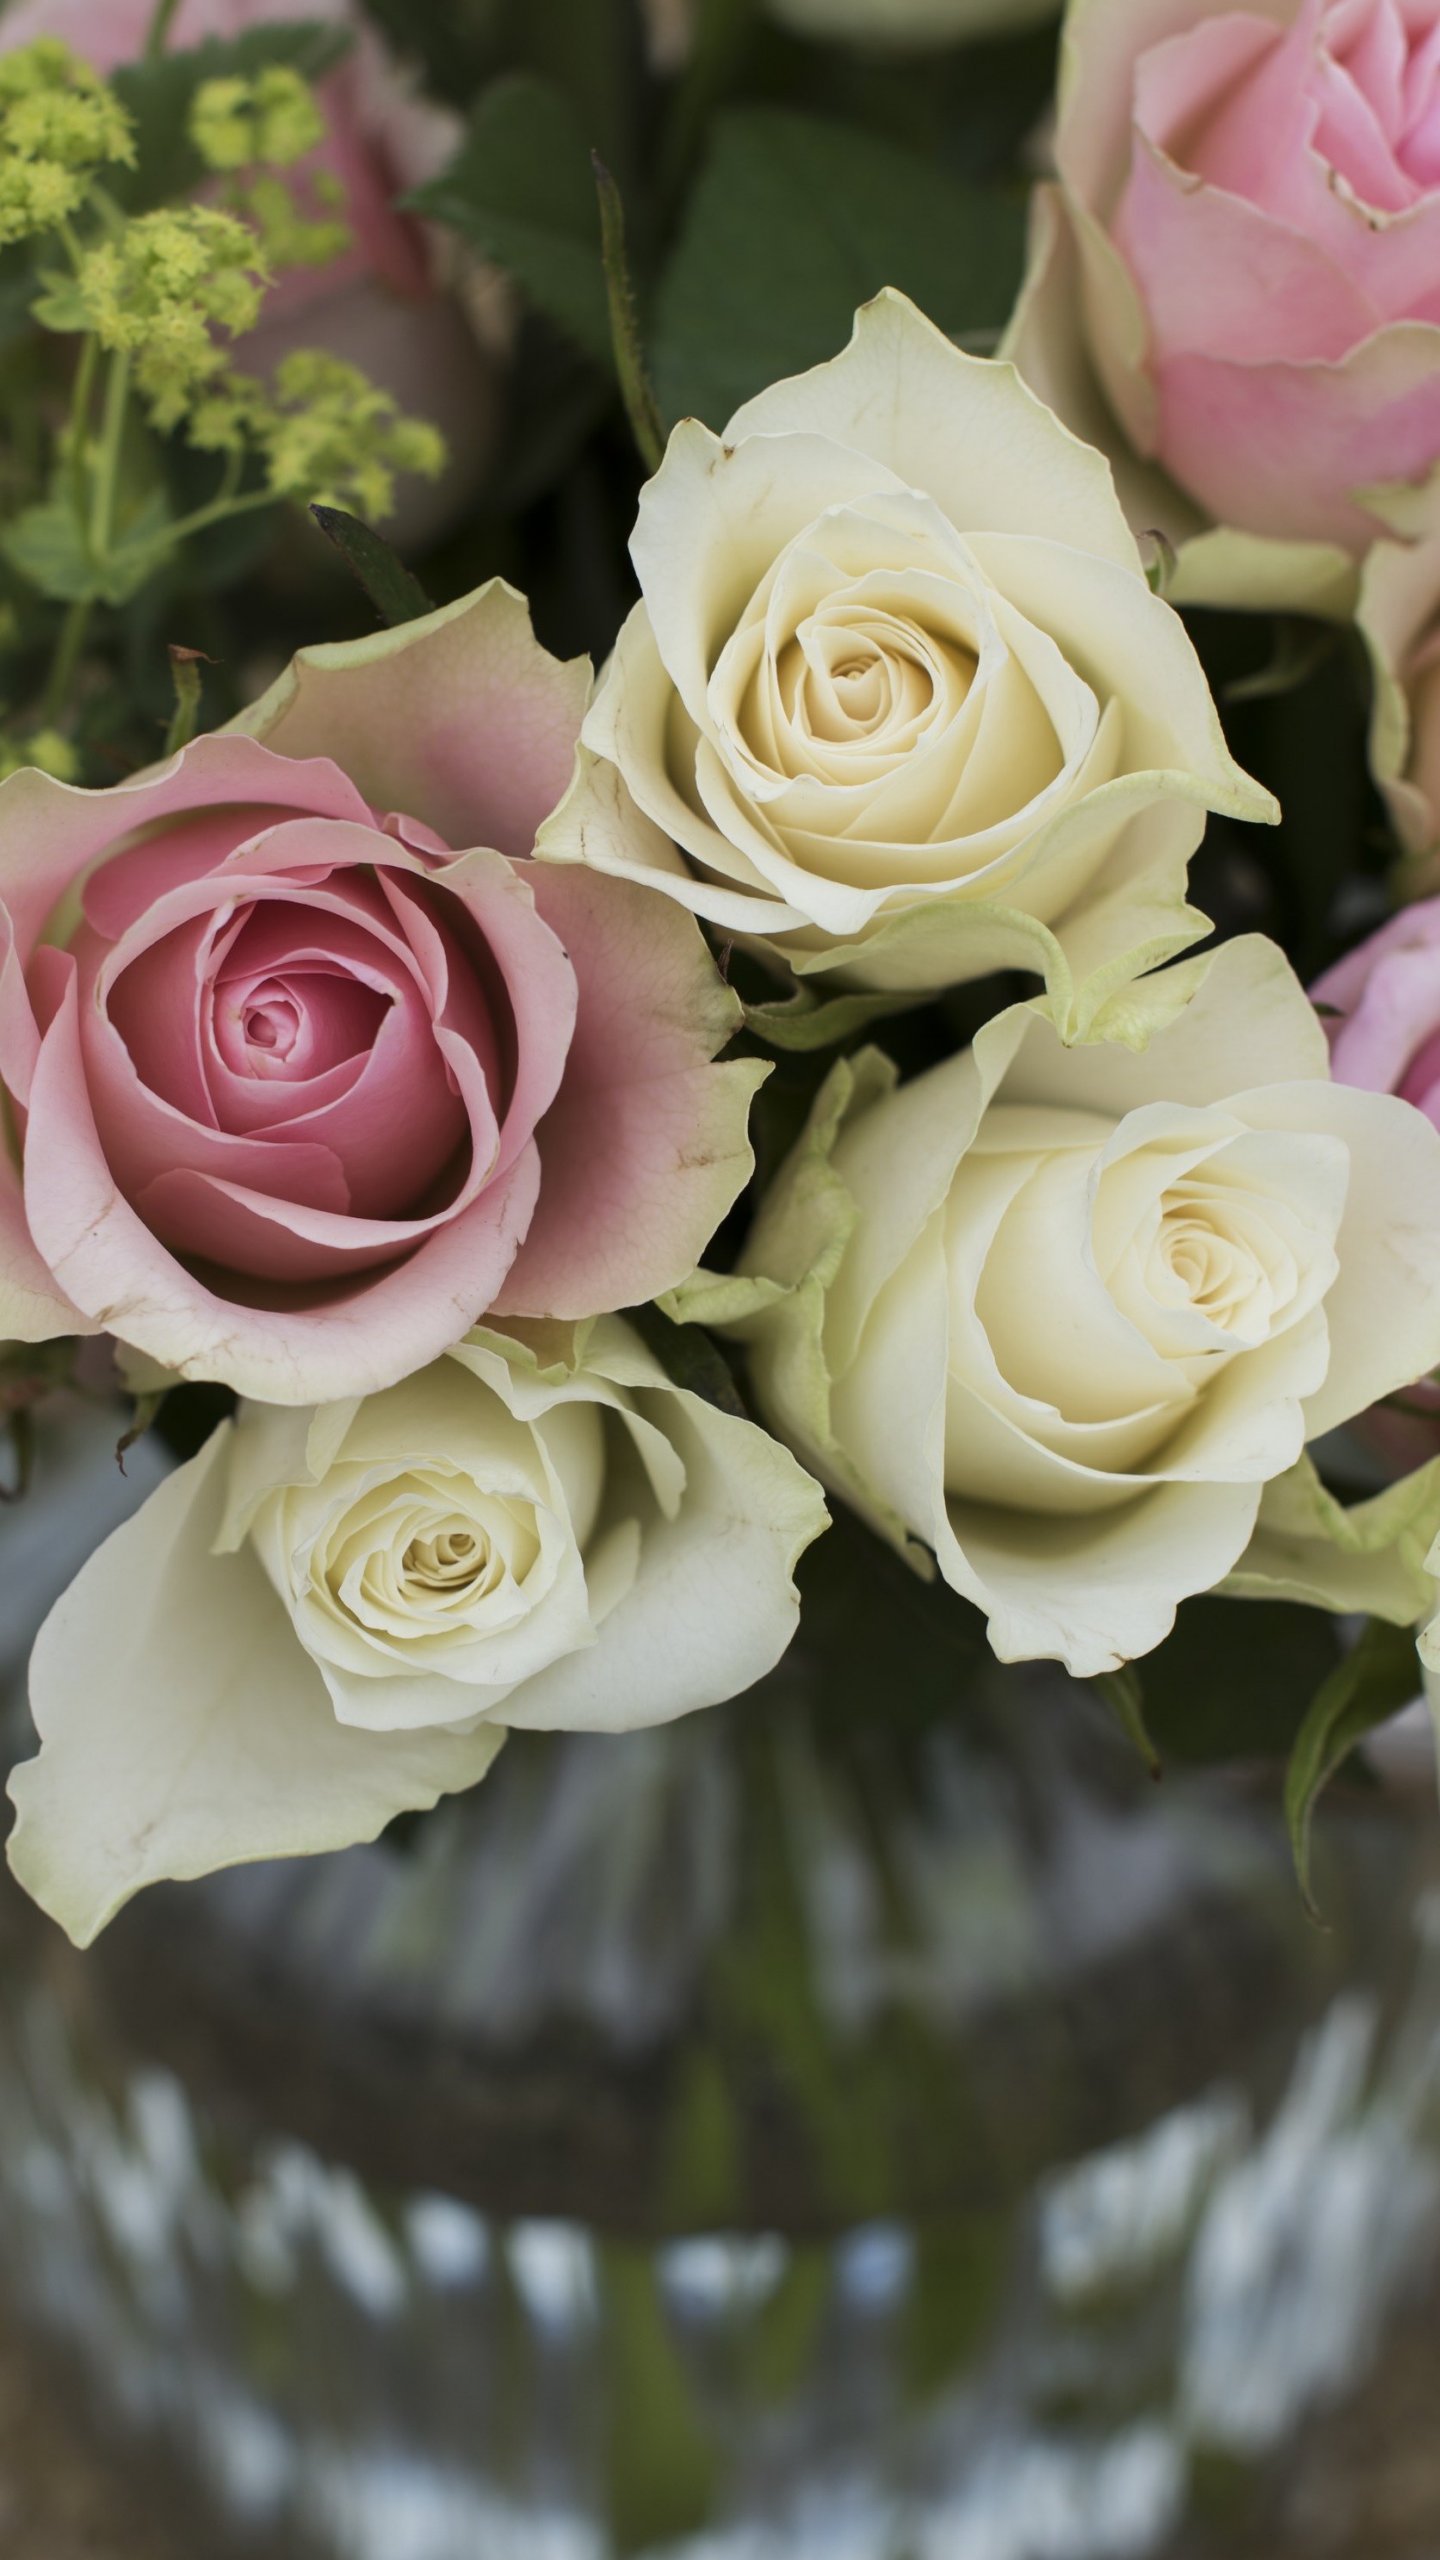 Pink & White Roses in a Vase Wallpaper - iPhone, Android & Desktop  Backgrounds